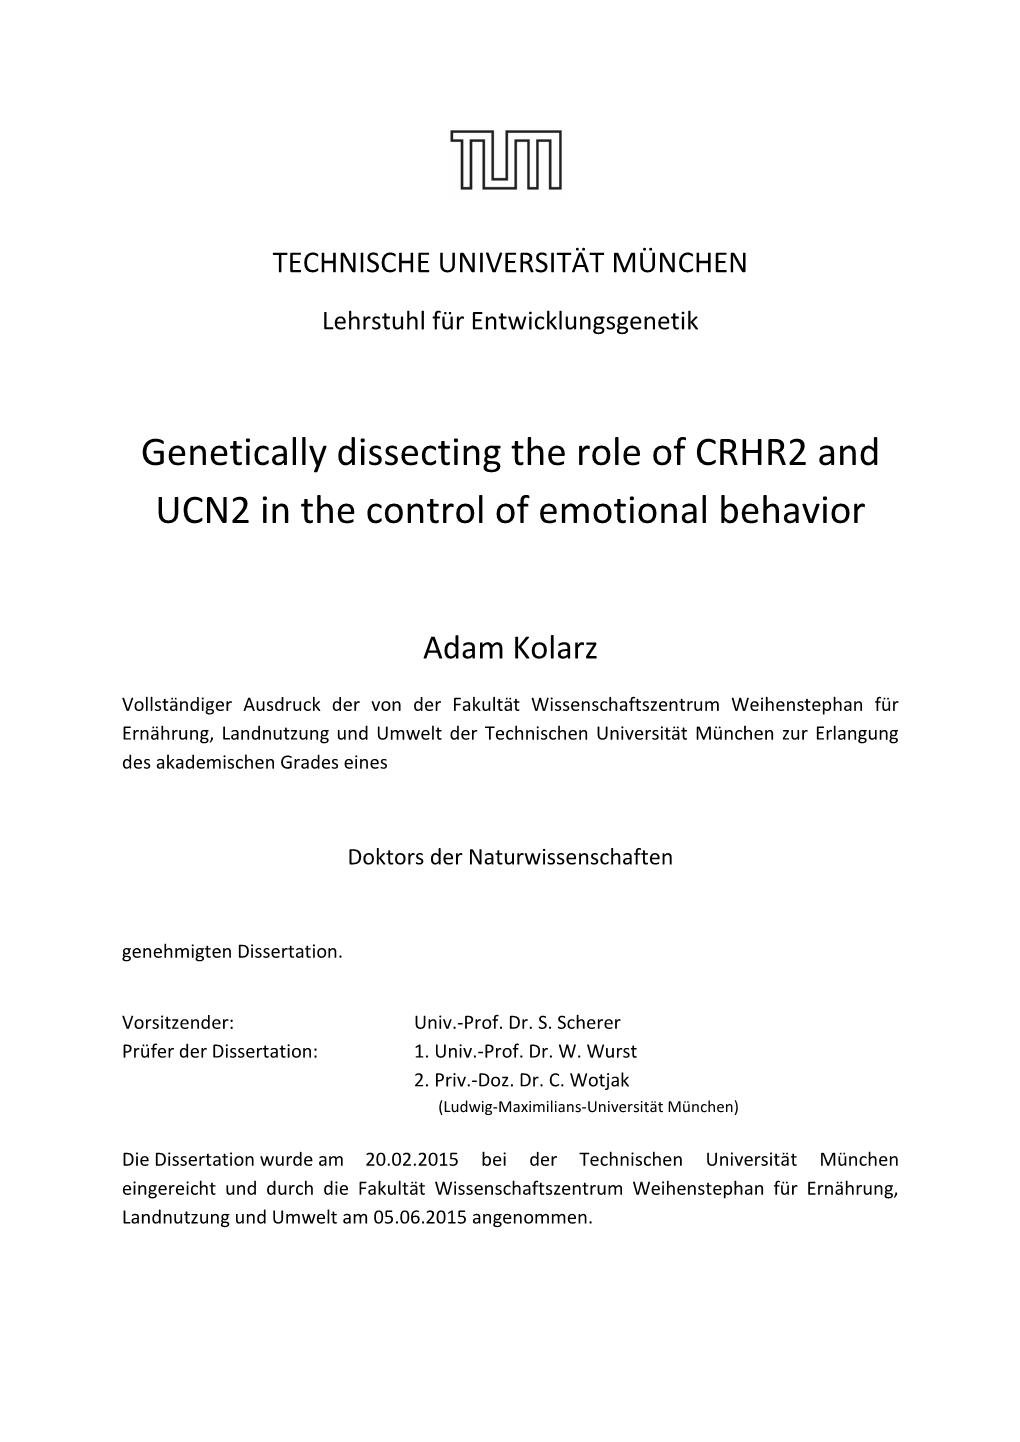 Genetically Dissecting the Role of CRHR2 and UCN2 in the Control of Emotional Behavior